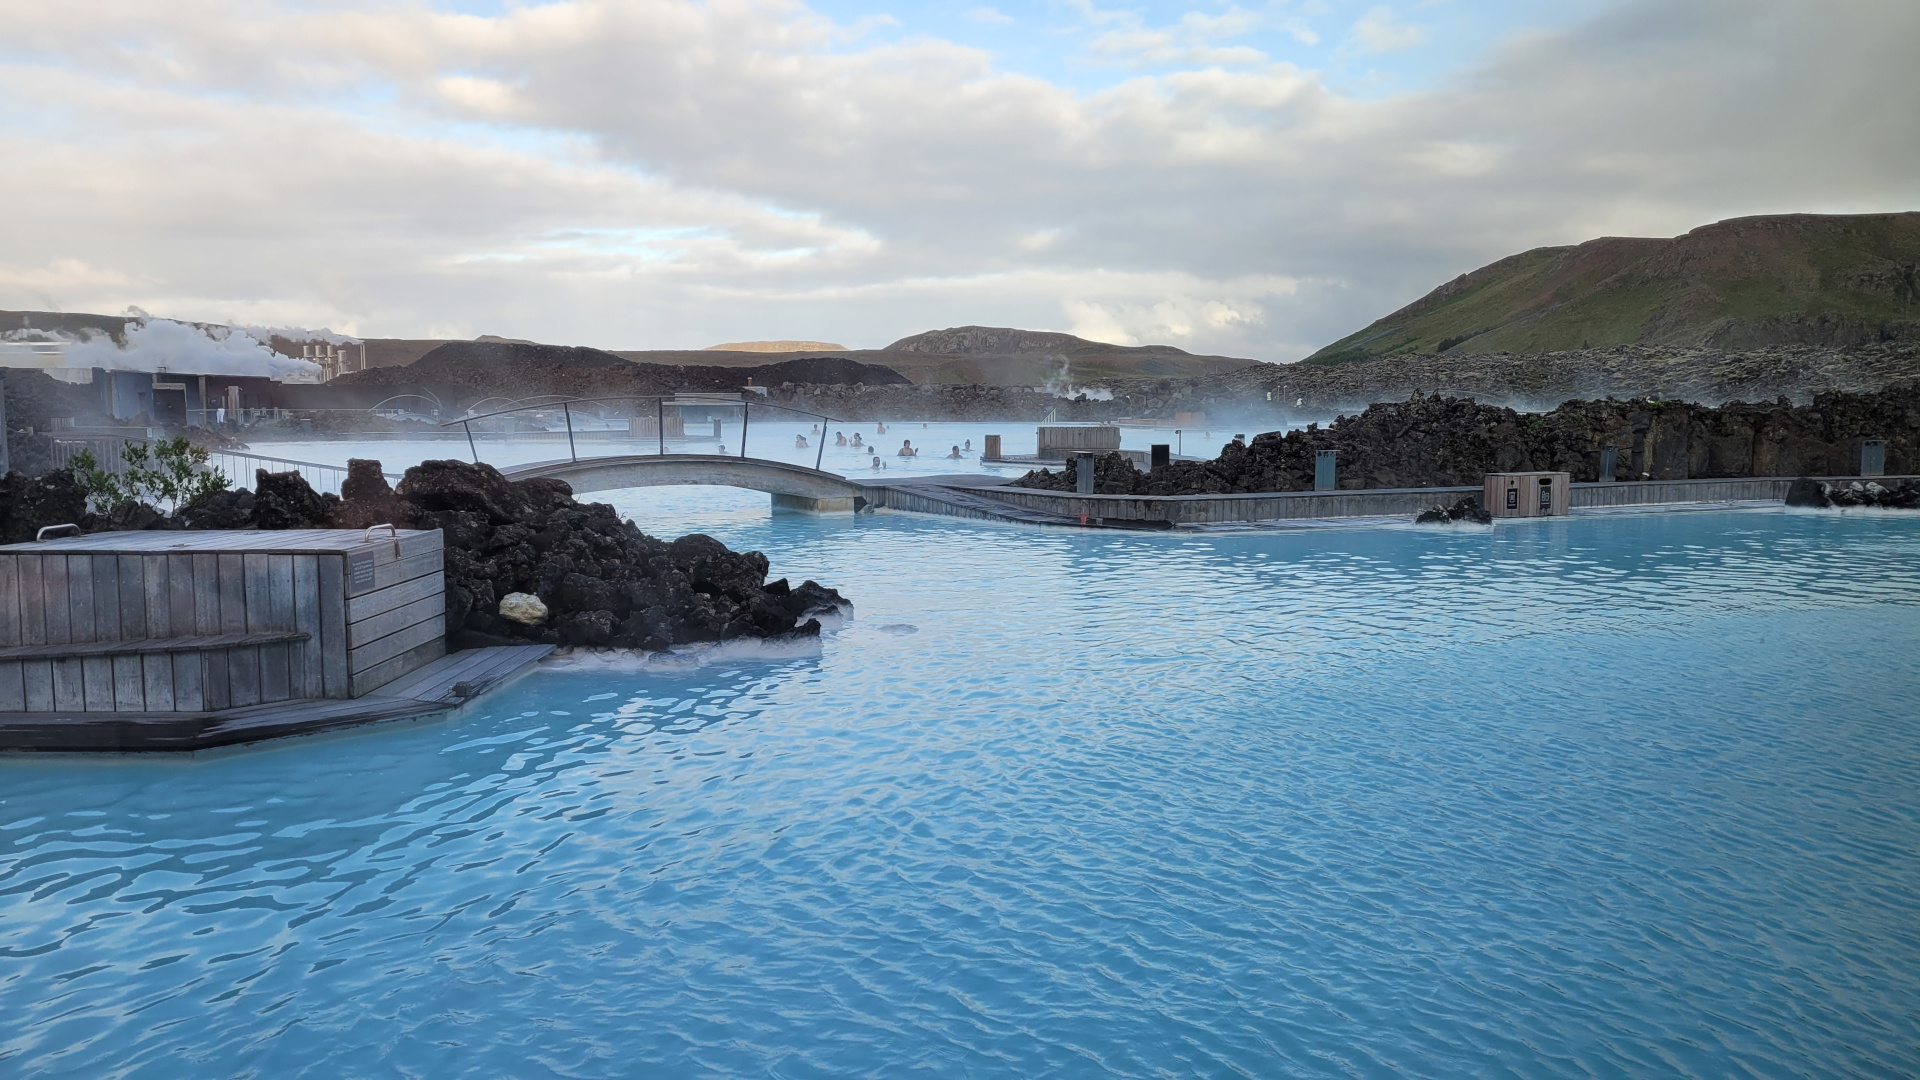 Blue Lagoon. The place where rich people go to take selfies. Yes, they have the phones in the water. 